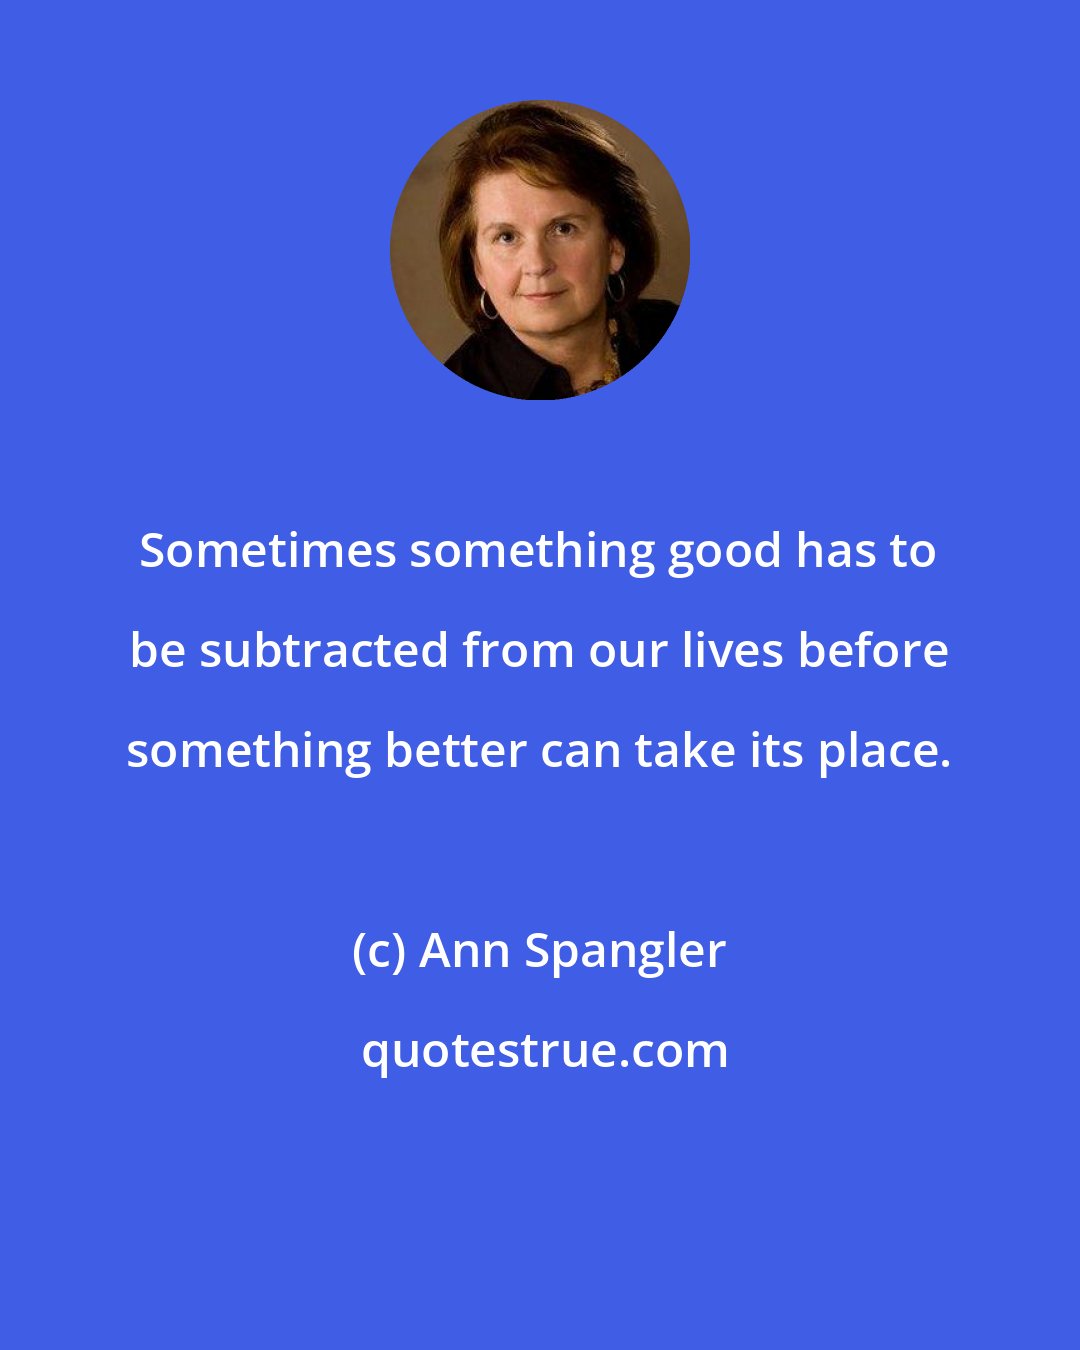 Ann Spangler: Sometimes something good has to be subtracted from our lives before something better can take its place.